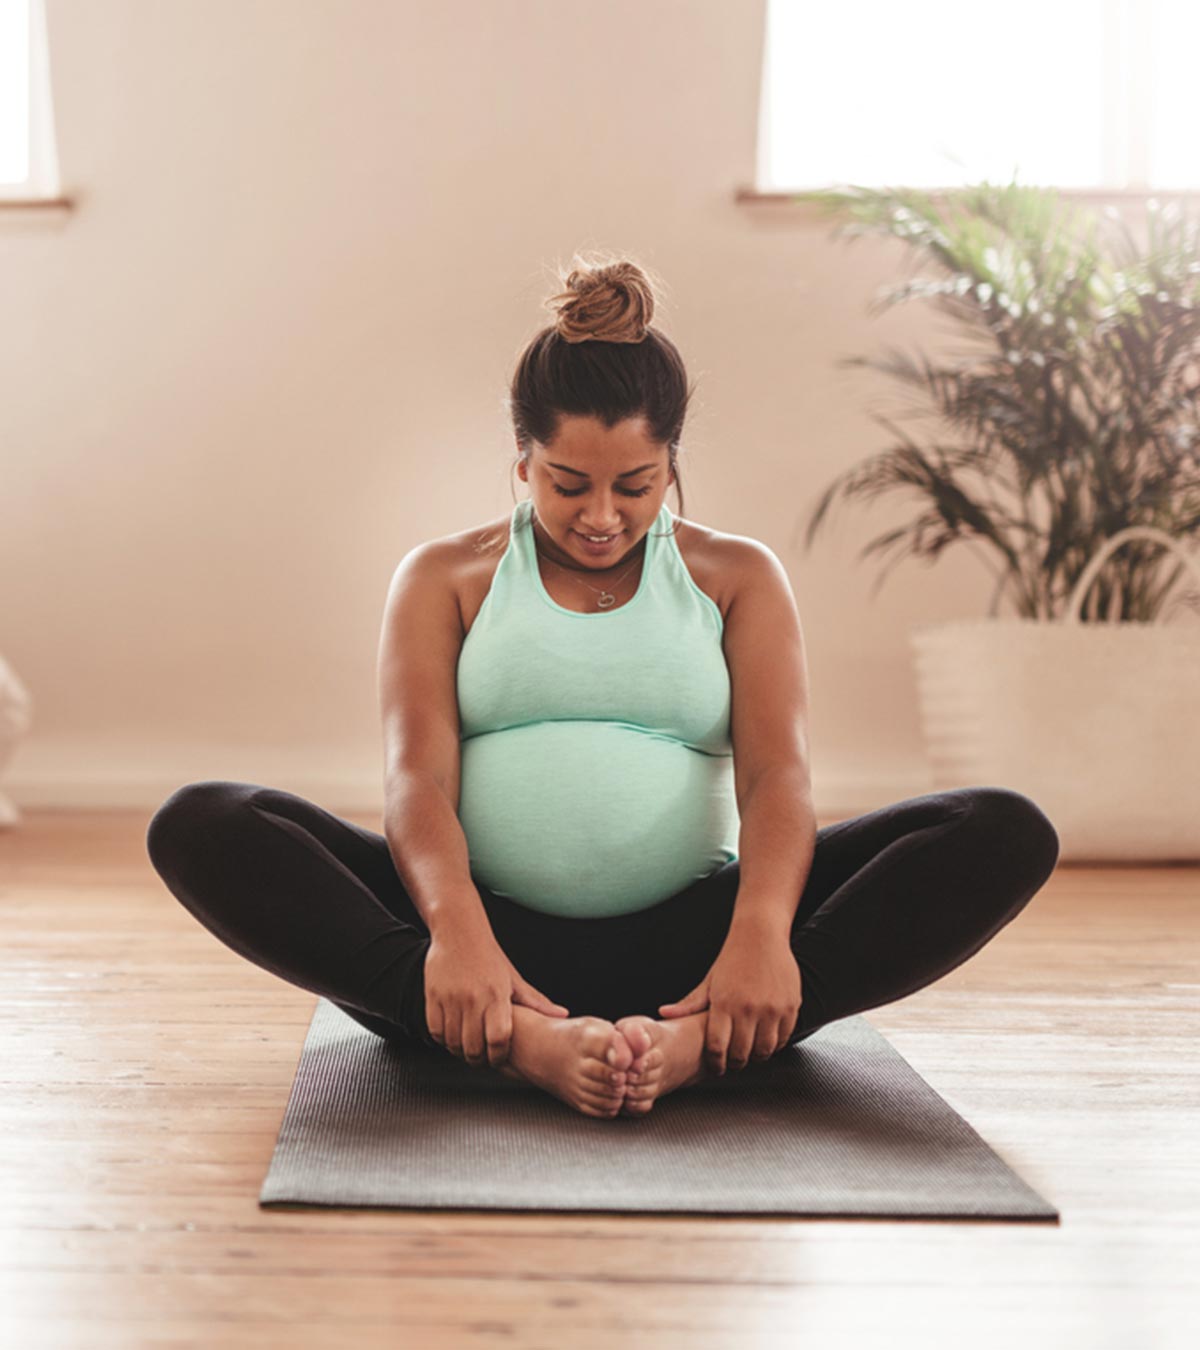 Posture During Pregnancy: What Is The Right Way?